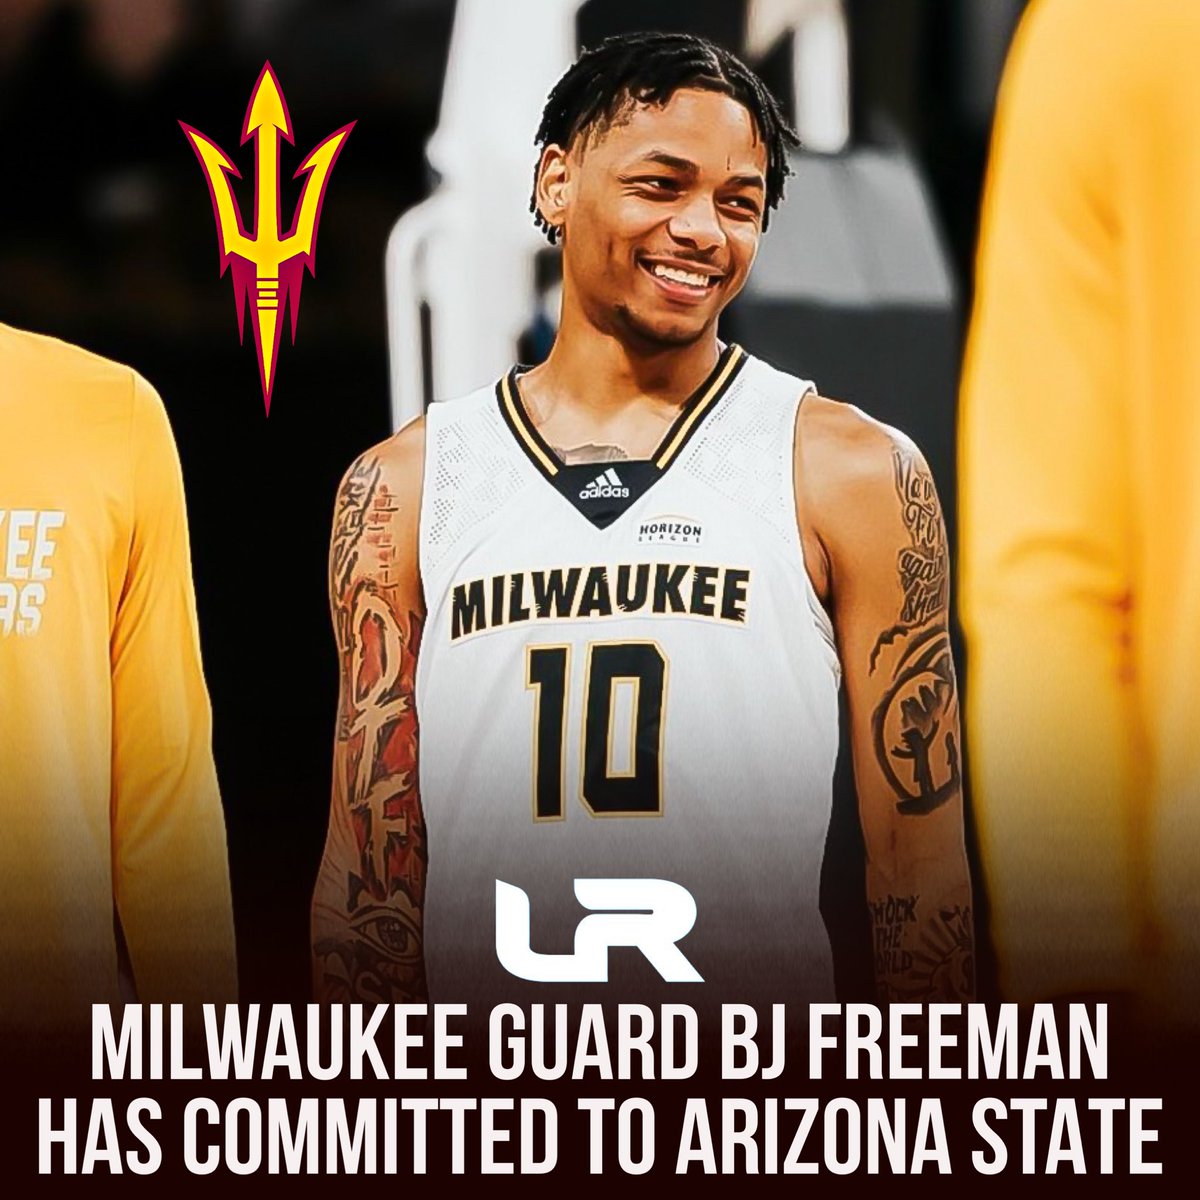 NEWS: UW-Milwaukee transfer BJ Freeman has committed to Arizona State, sources told @LeagueRDY. Freeman began his career playing one season at Dodge City CC before playing the last two at Milwaukee. Was All-Horizon League Second Team this season. He averaged 21.1PPG, 6.6RPG,…